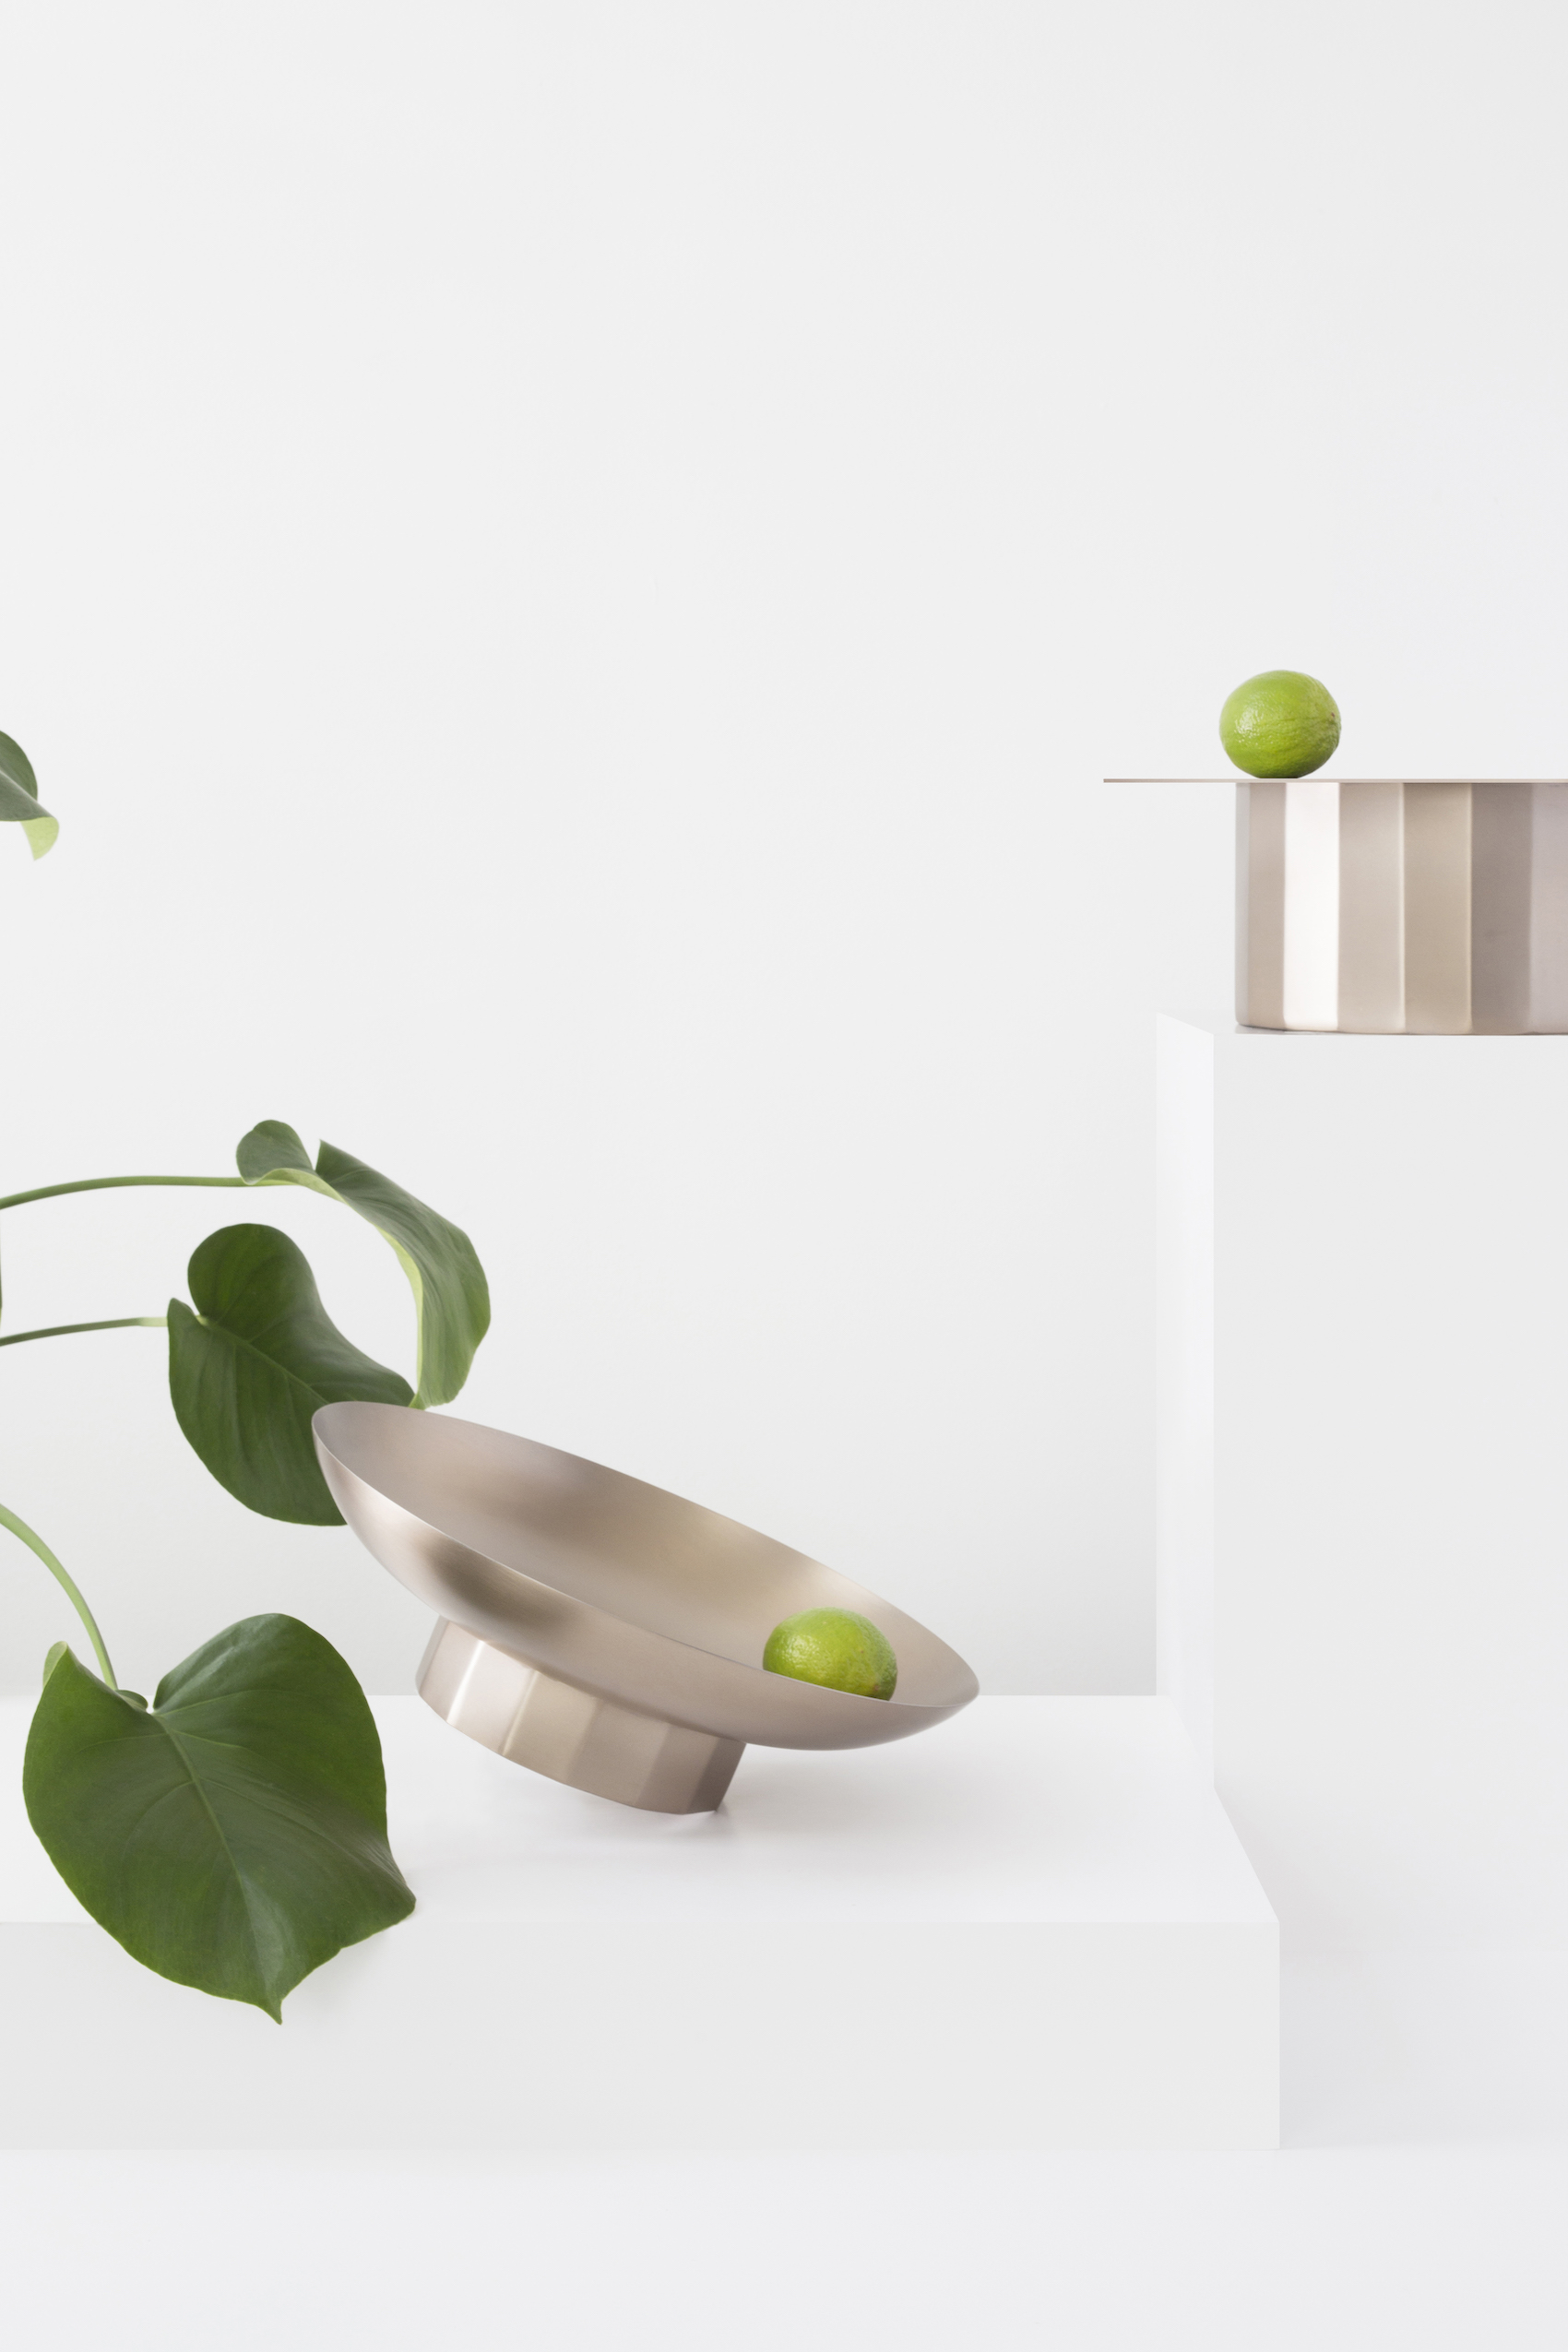 Minimalist Collection of Accessories "Doric" by PaulinePlusLuis